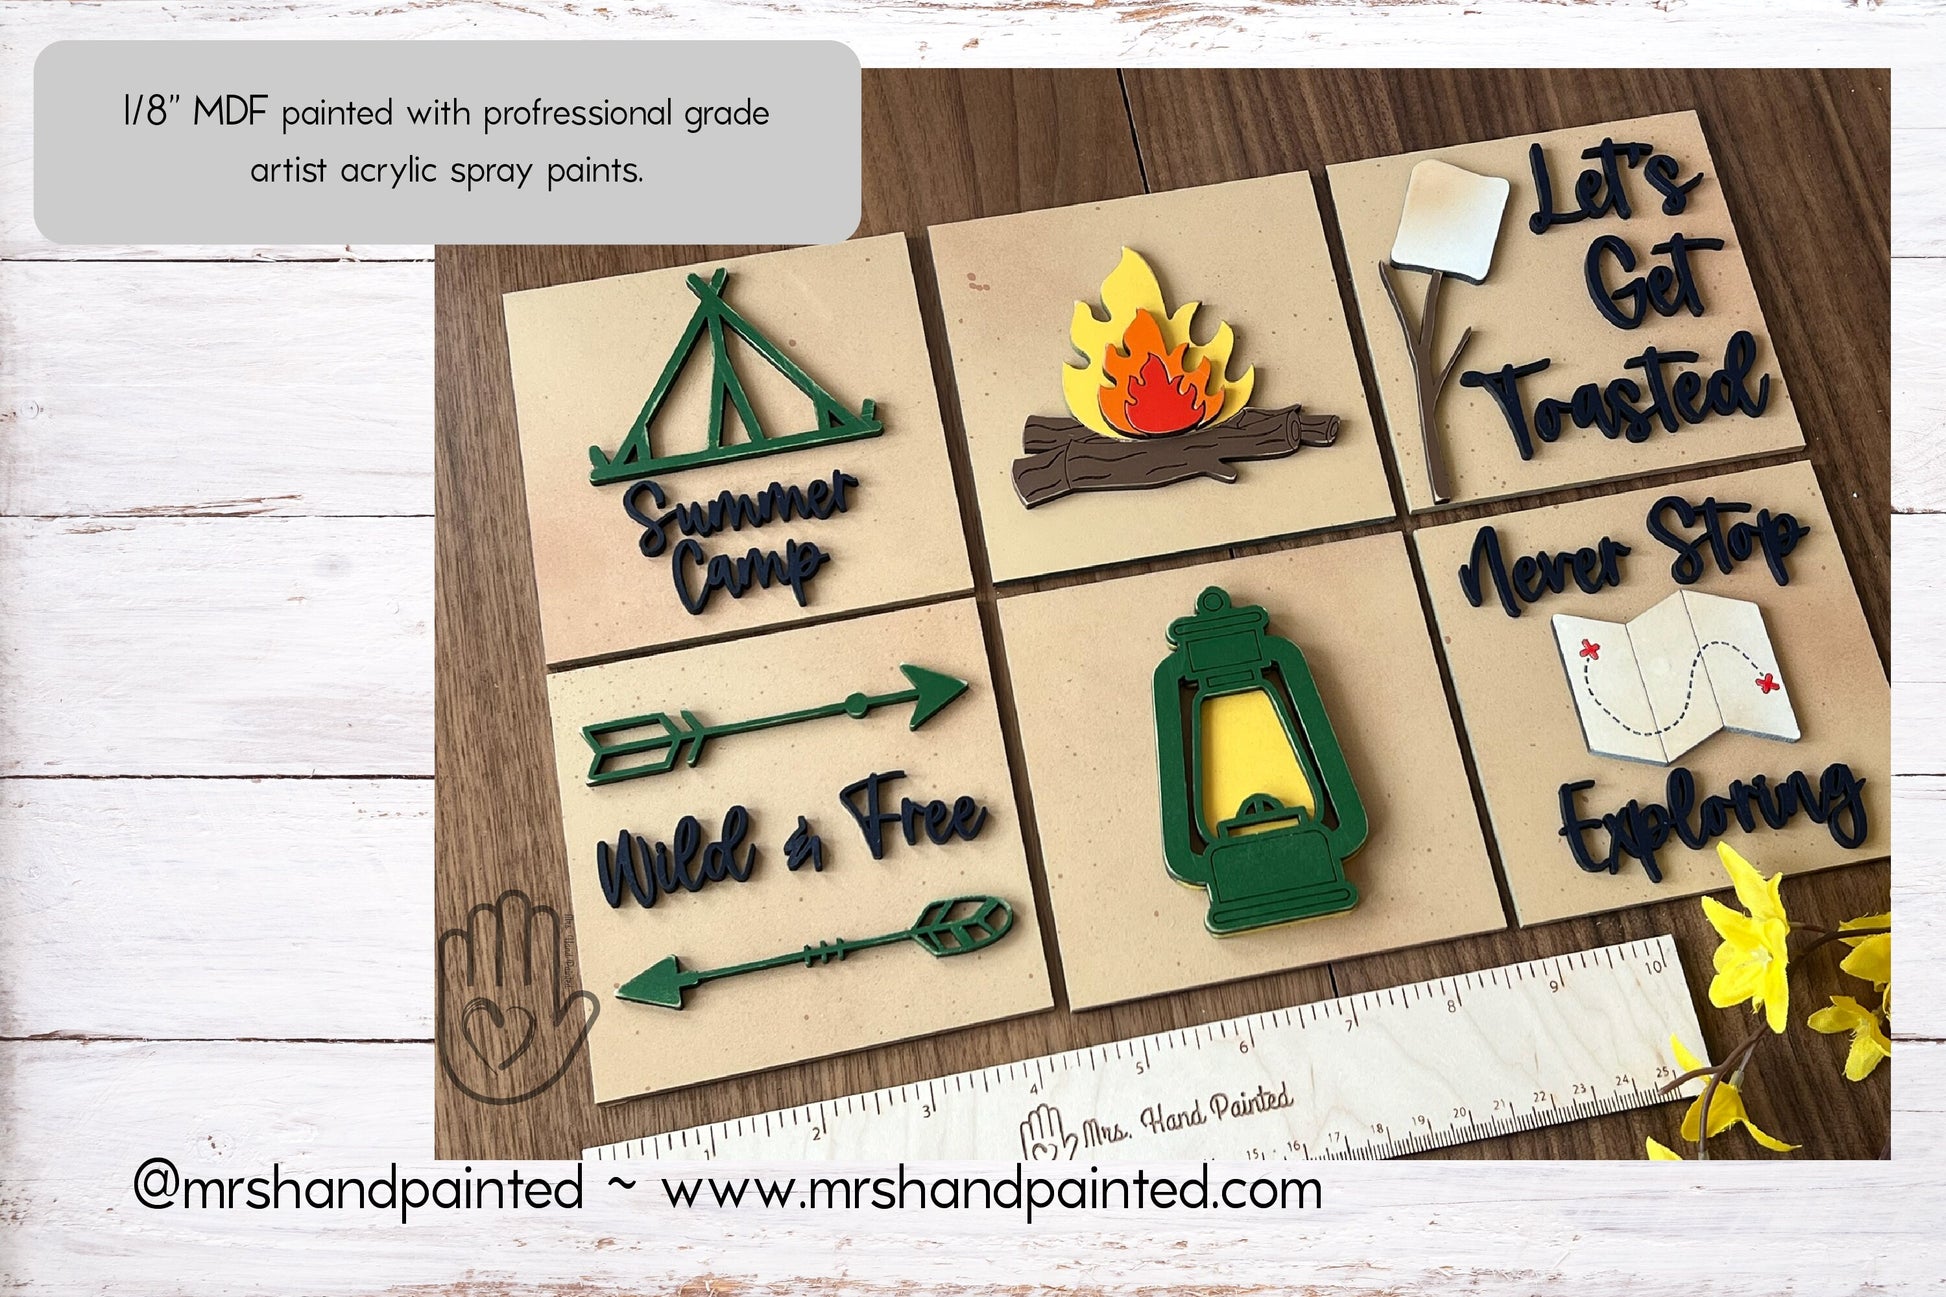 Summer Camp Interchangeable Signs - Laser Cut Wood Painted